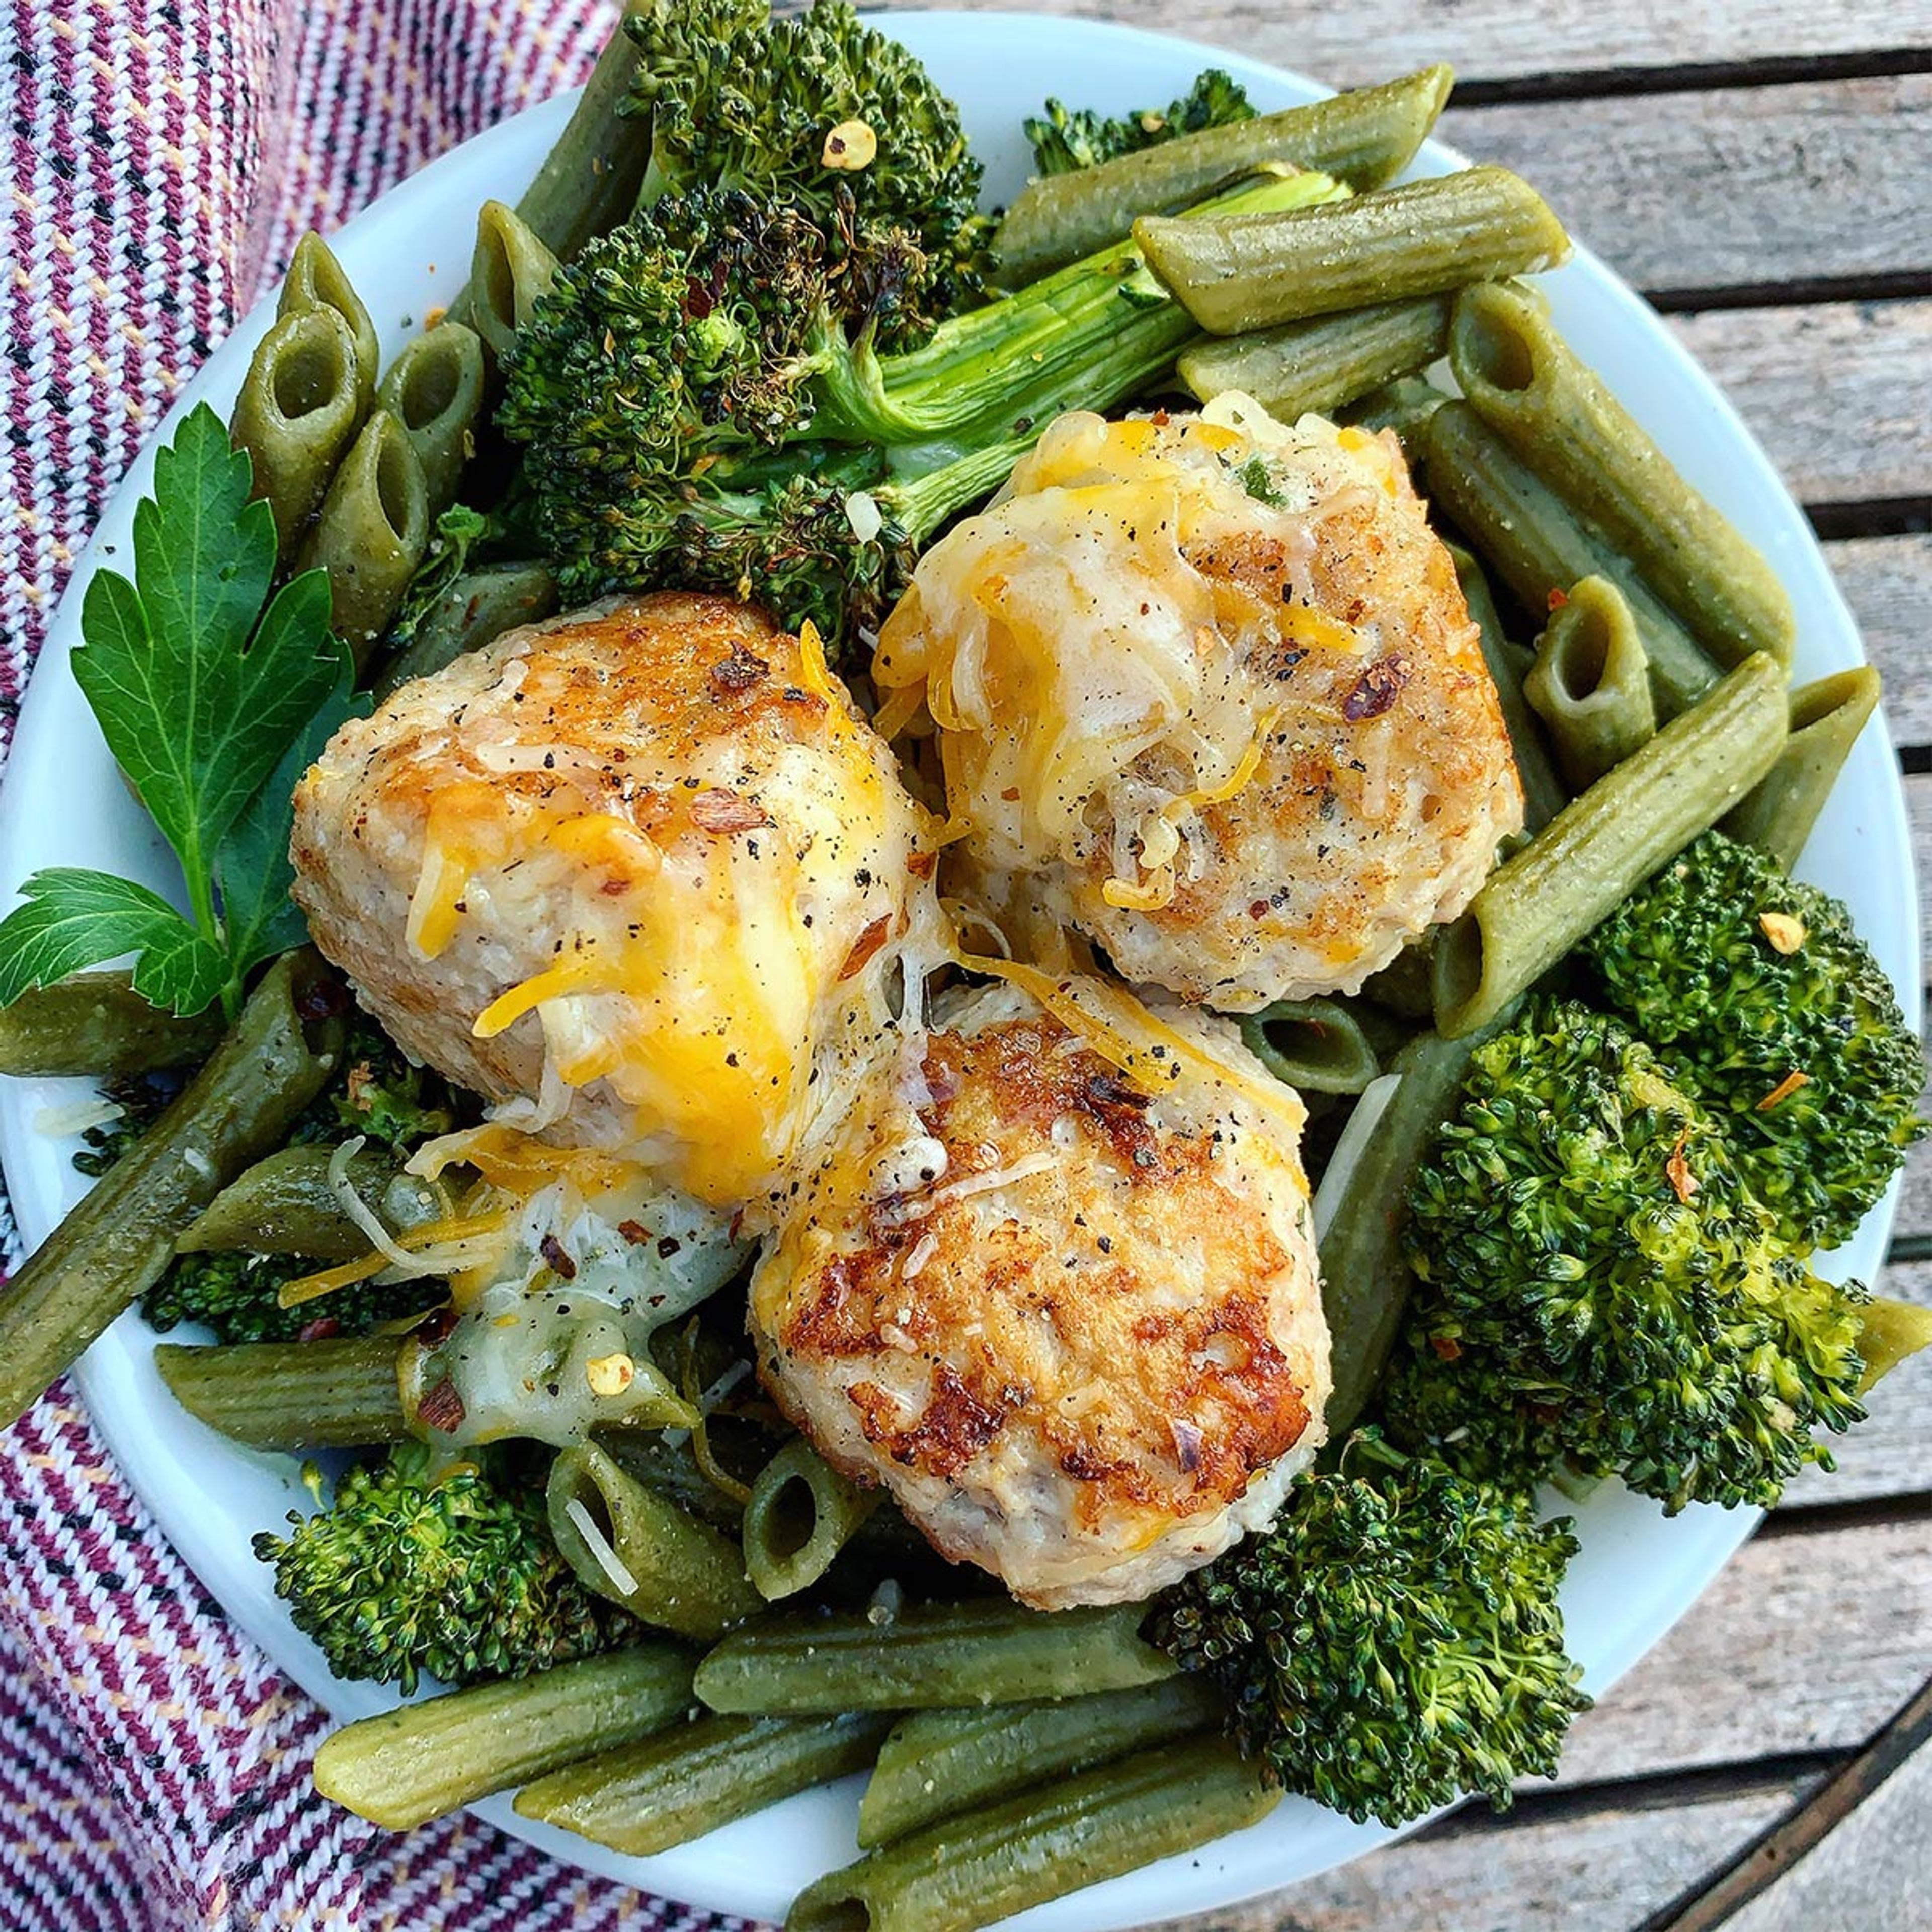 Three chicken meatballs topped with cheese sit atop a bed of green pasta and broccoli.